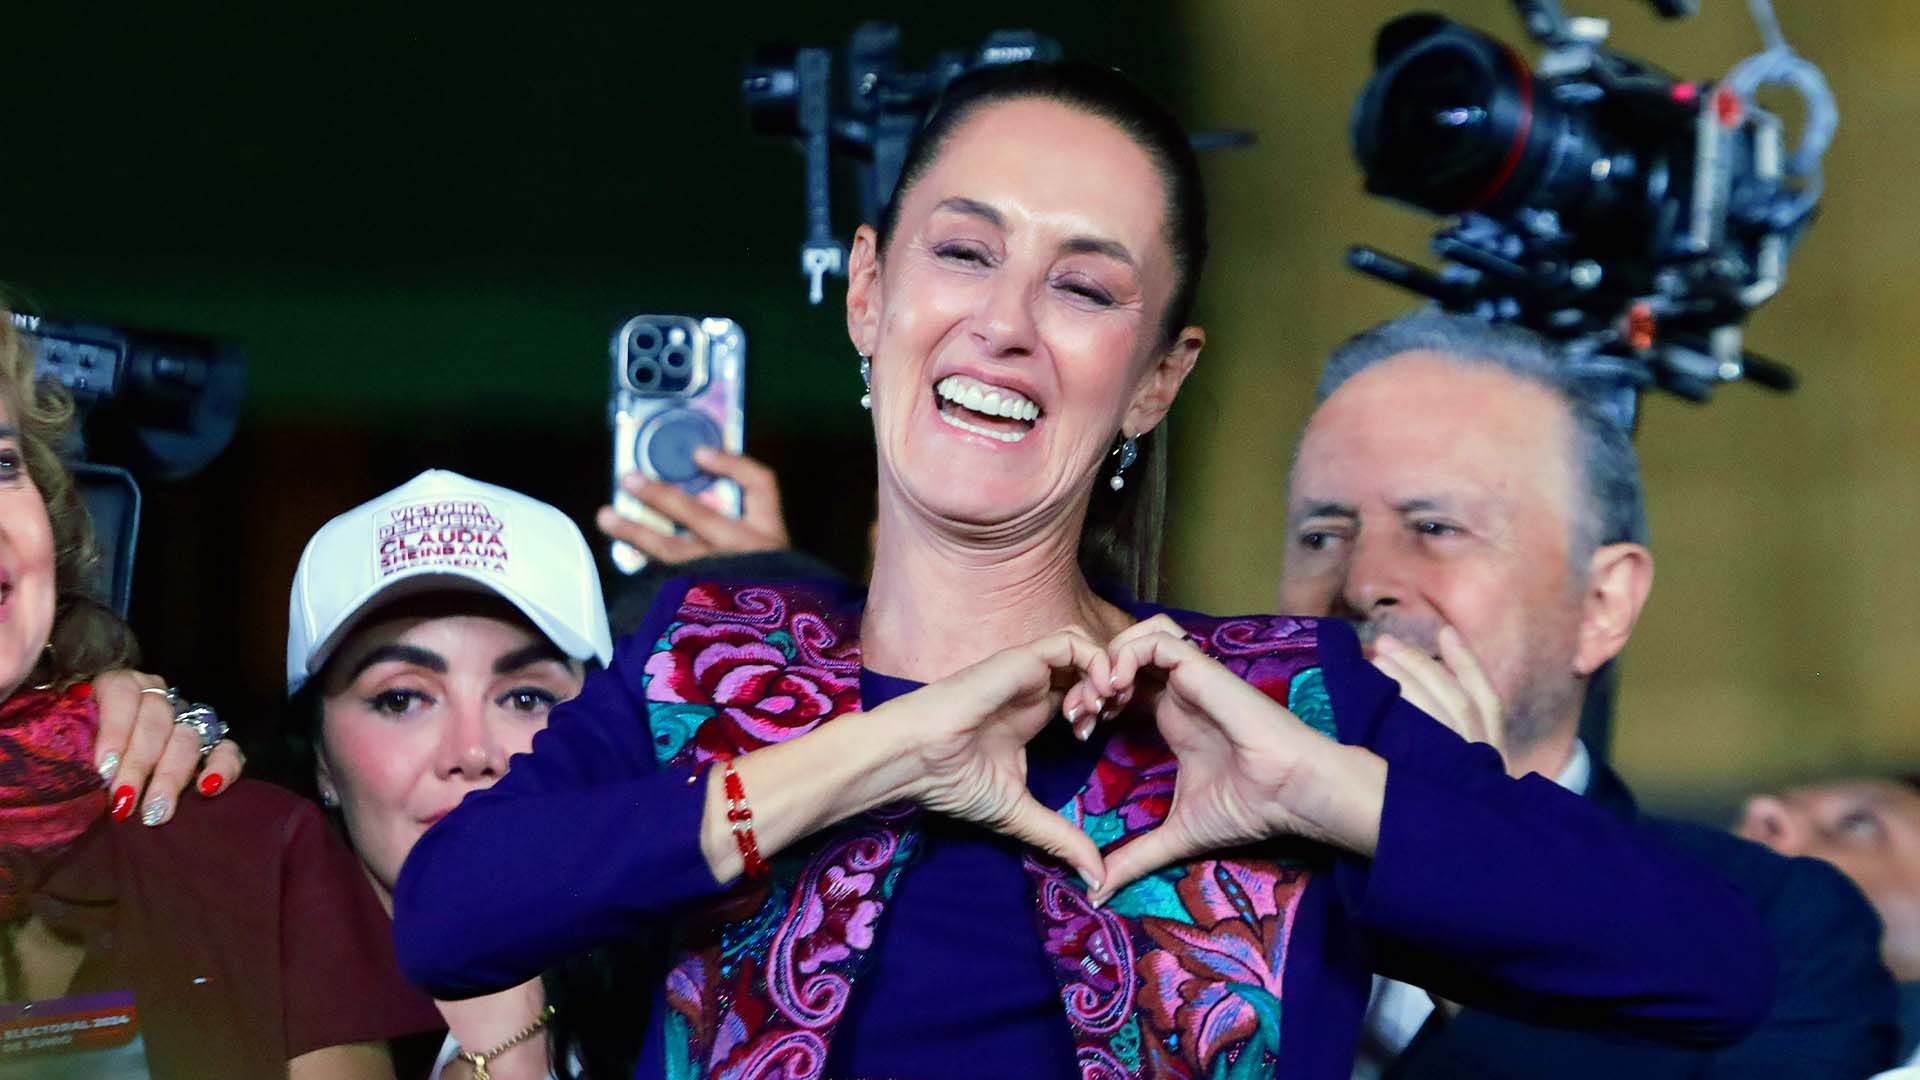 Mexico Elects Its 1st Female President